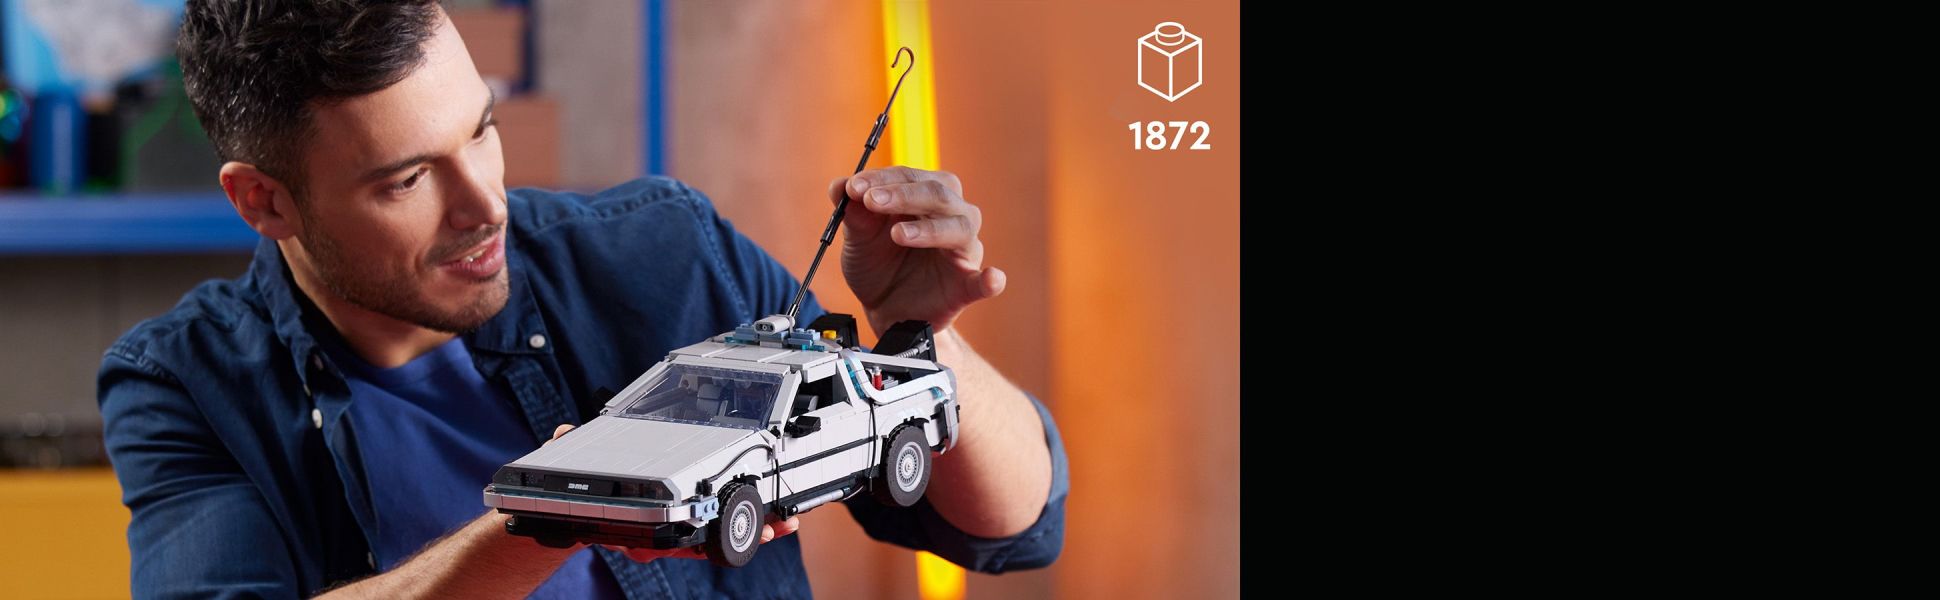 LEGO Back to the Future Time Machine (10300) – The Red Balloon Toy Store